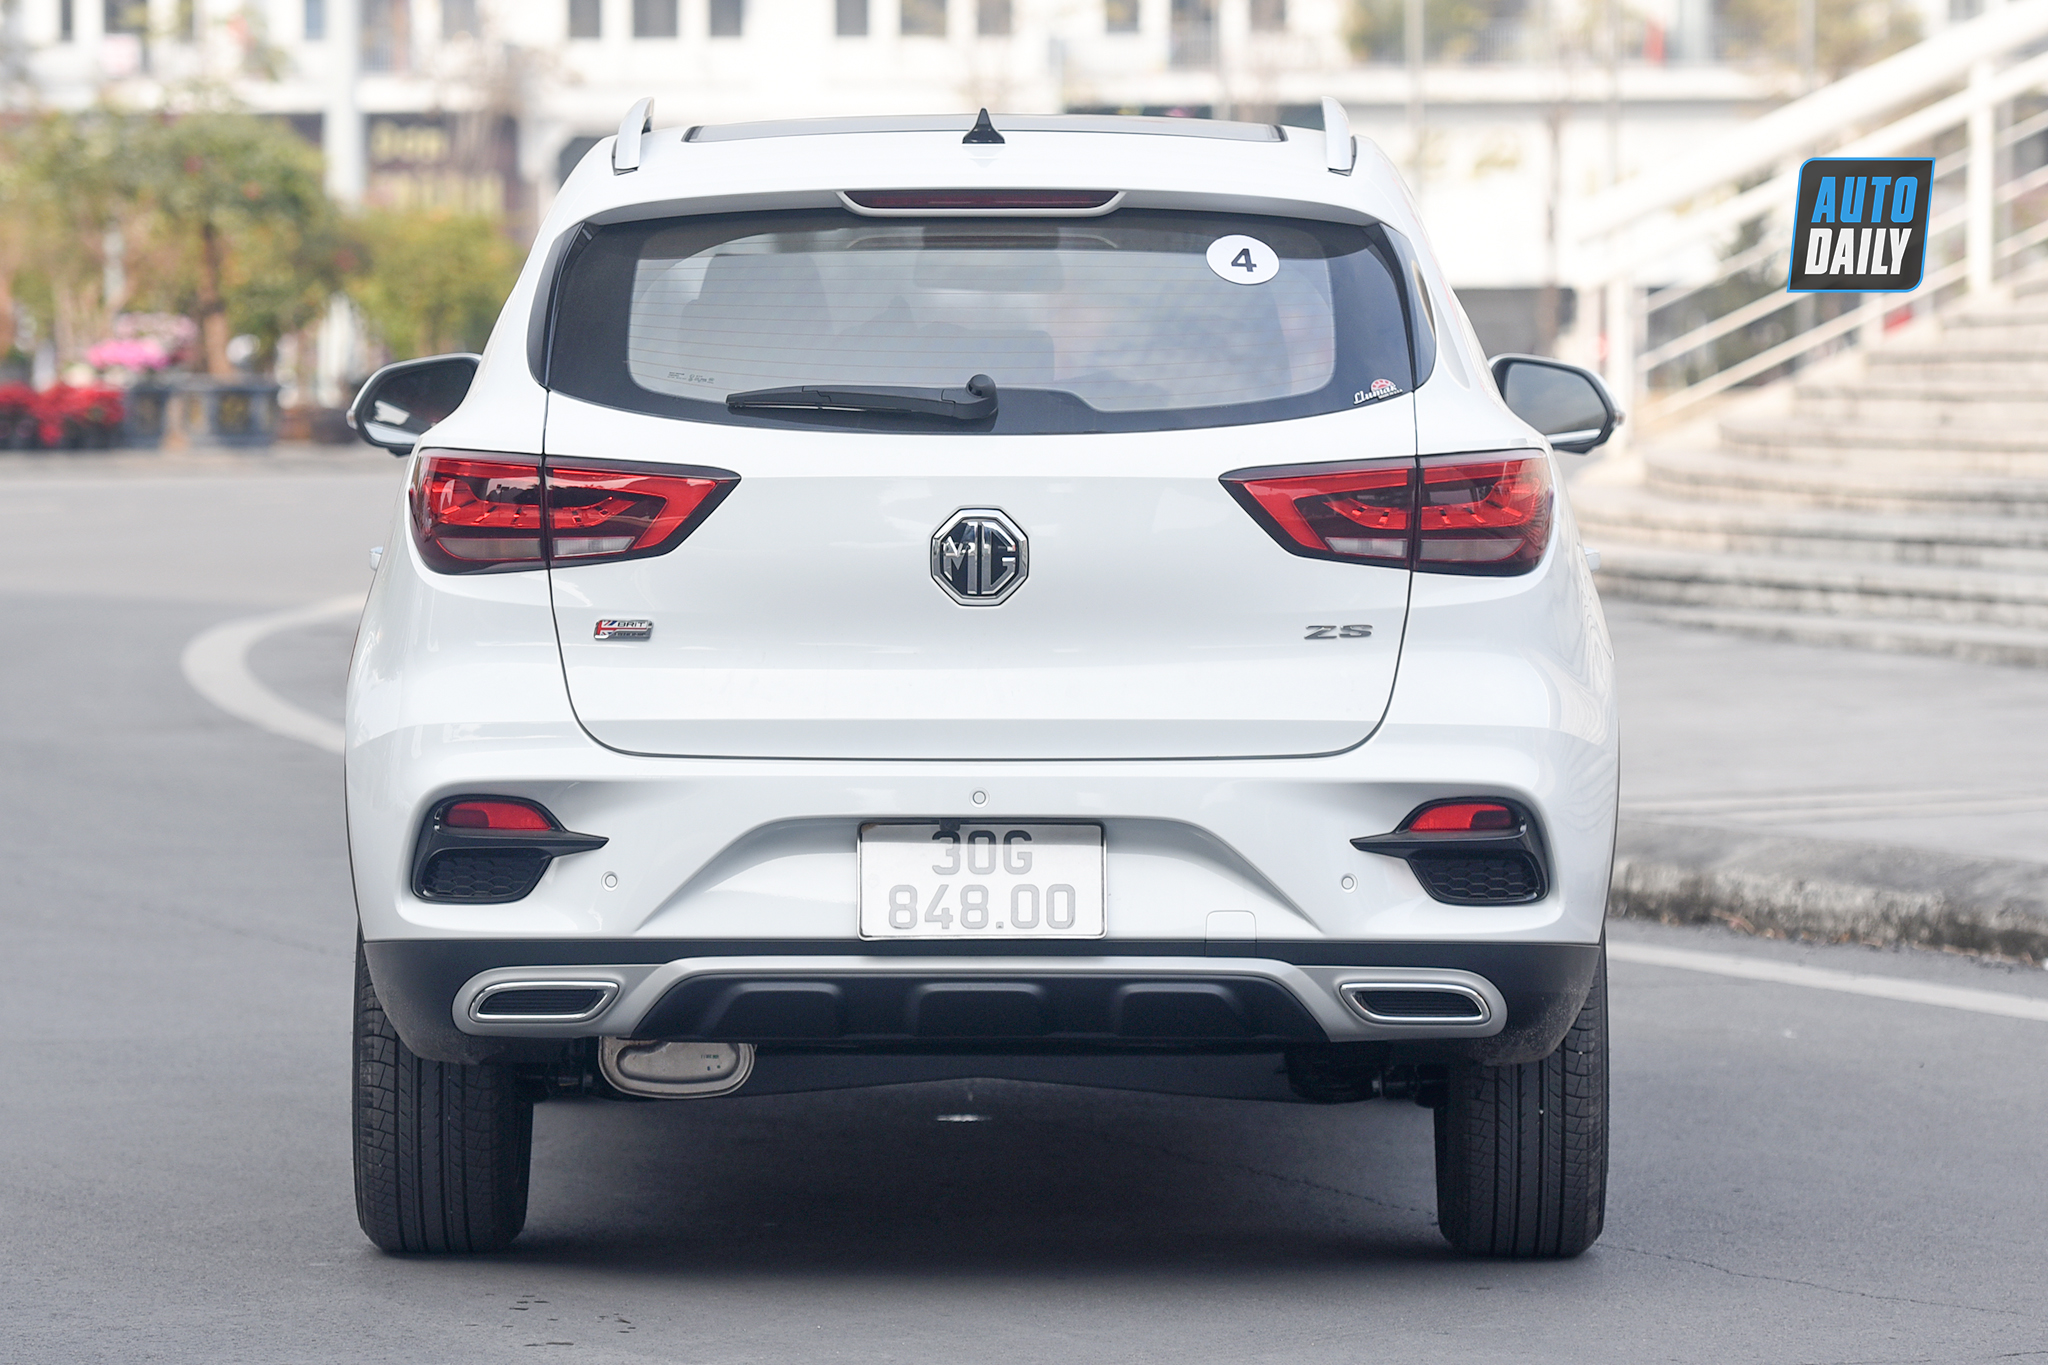 MG ZS 2021 evaluation: A reasonable choice of VND 600 million 5.jpg price range